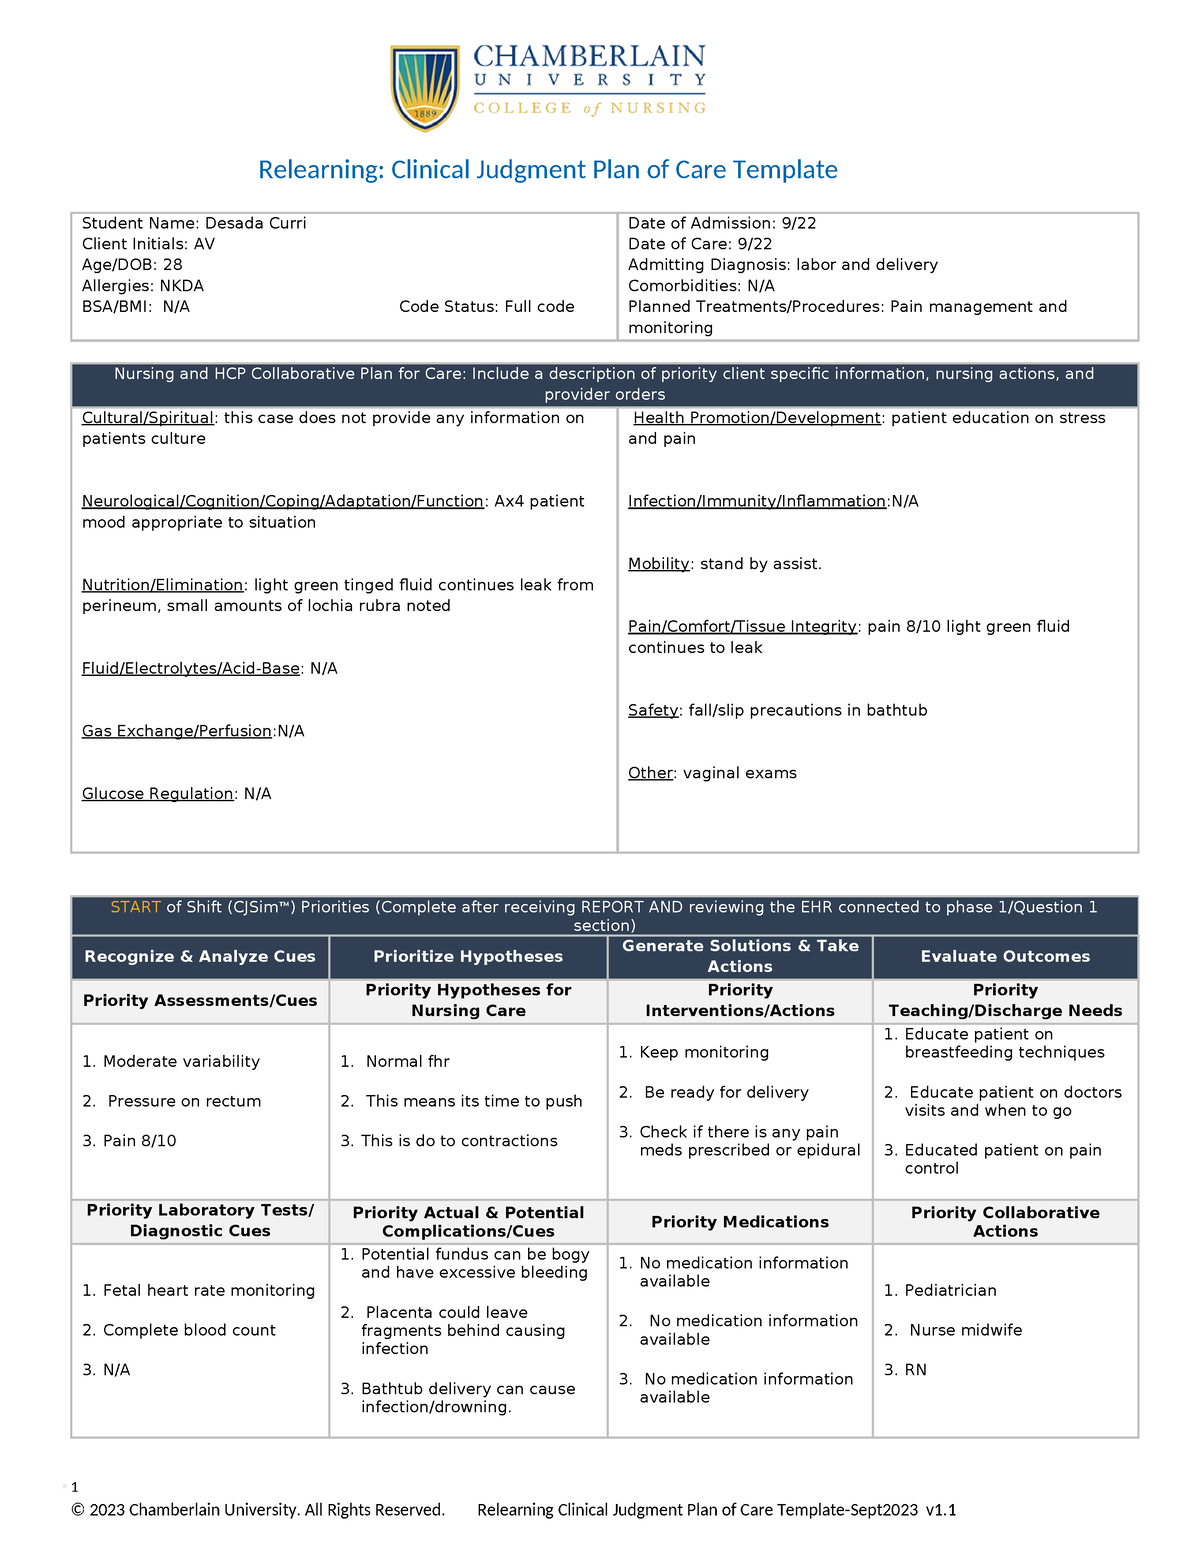 Relearning Clinical Judgment Plan of Care Template Sept23 4) - Student ...